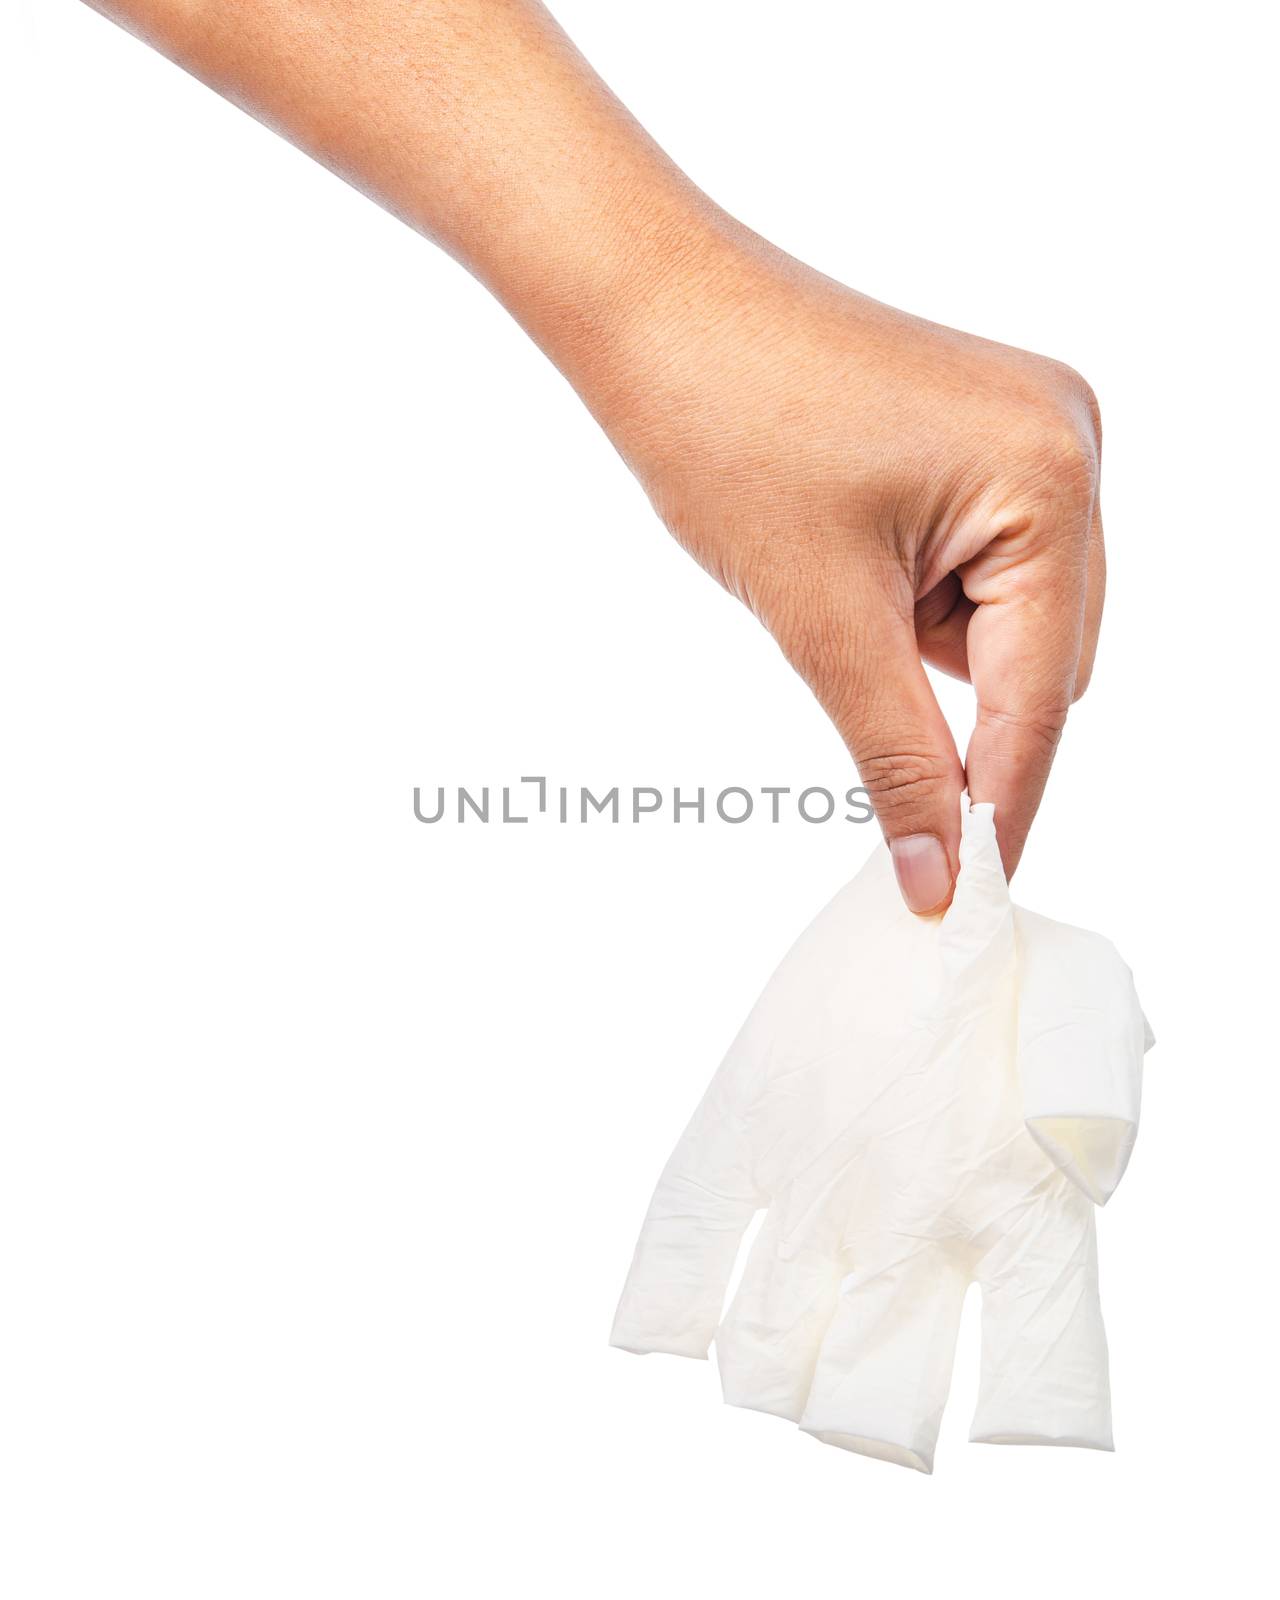 Hand throwing away white disposable gloves medical, Isolated on white background, Save clipping path. Infection control concept.